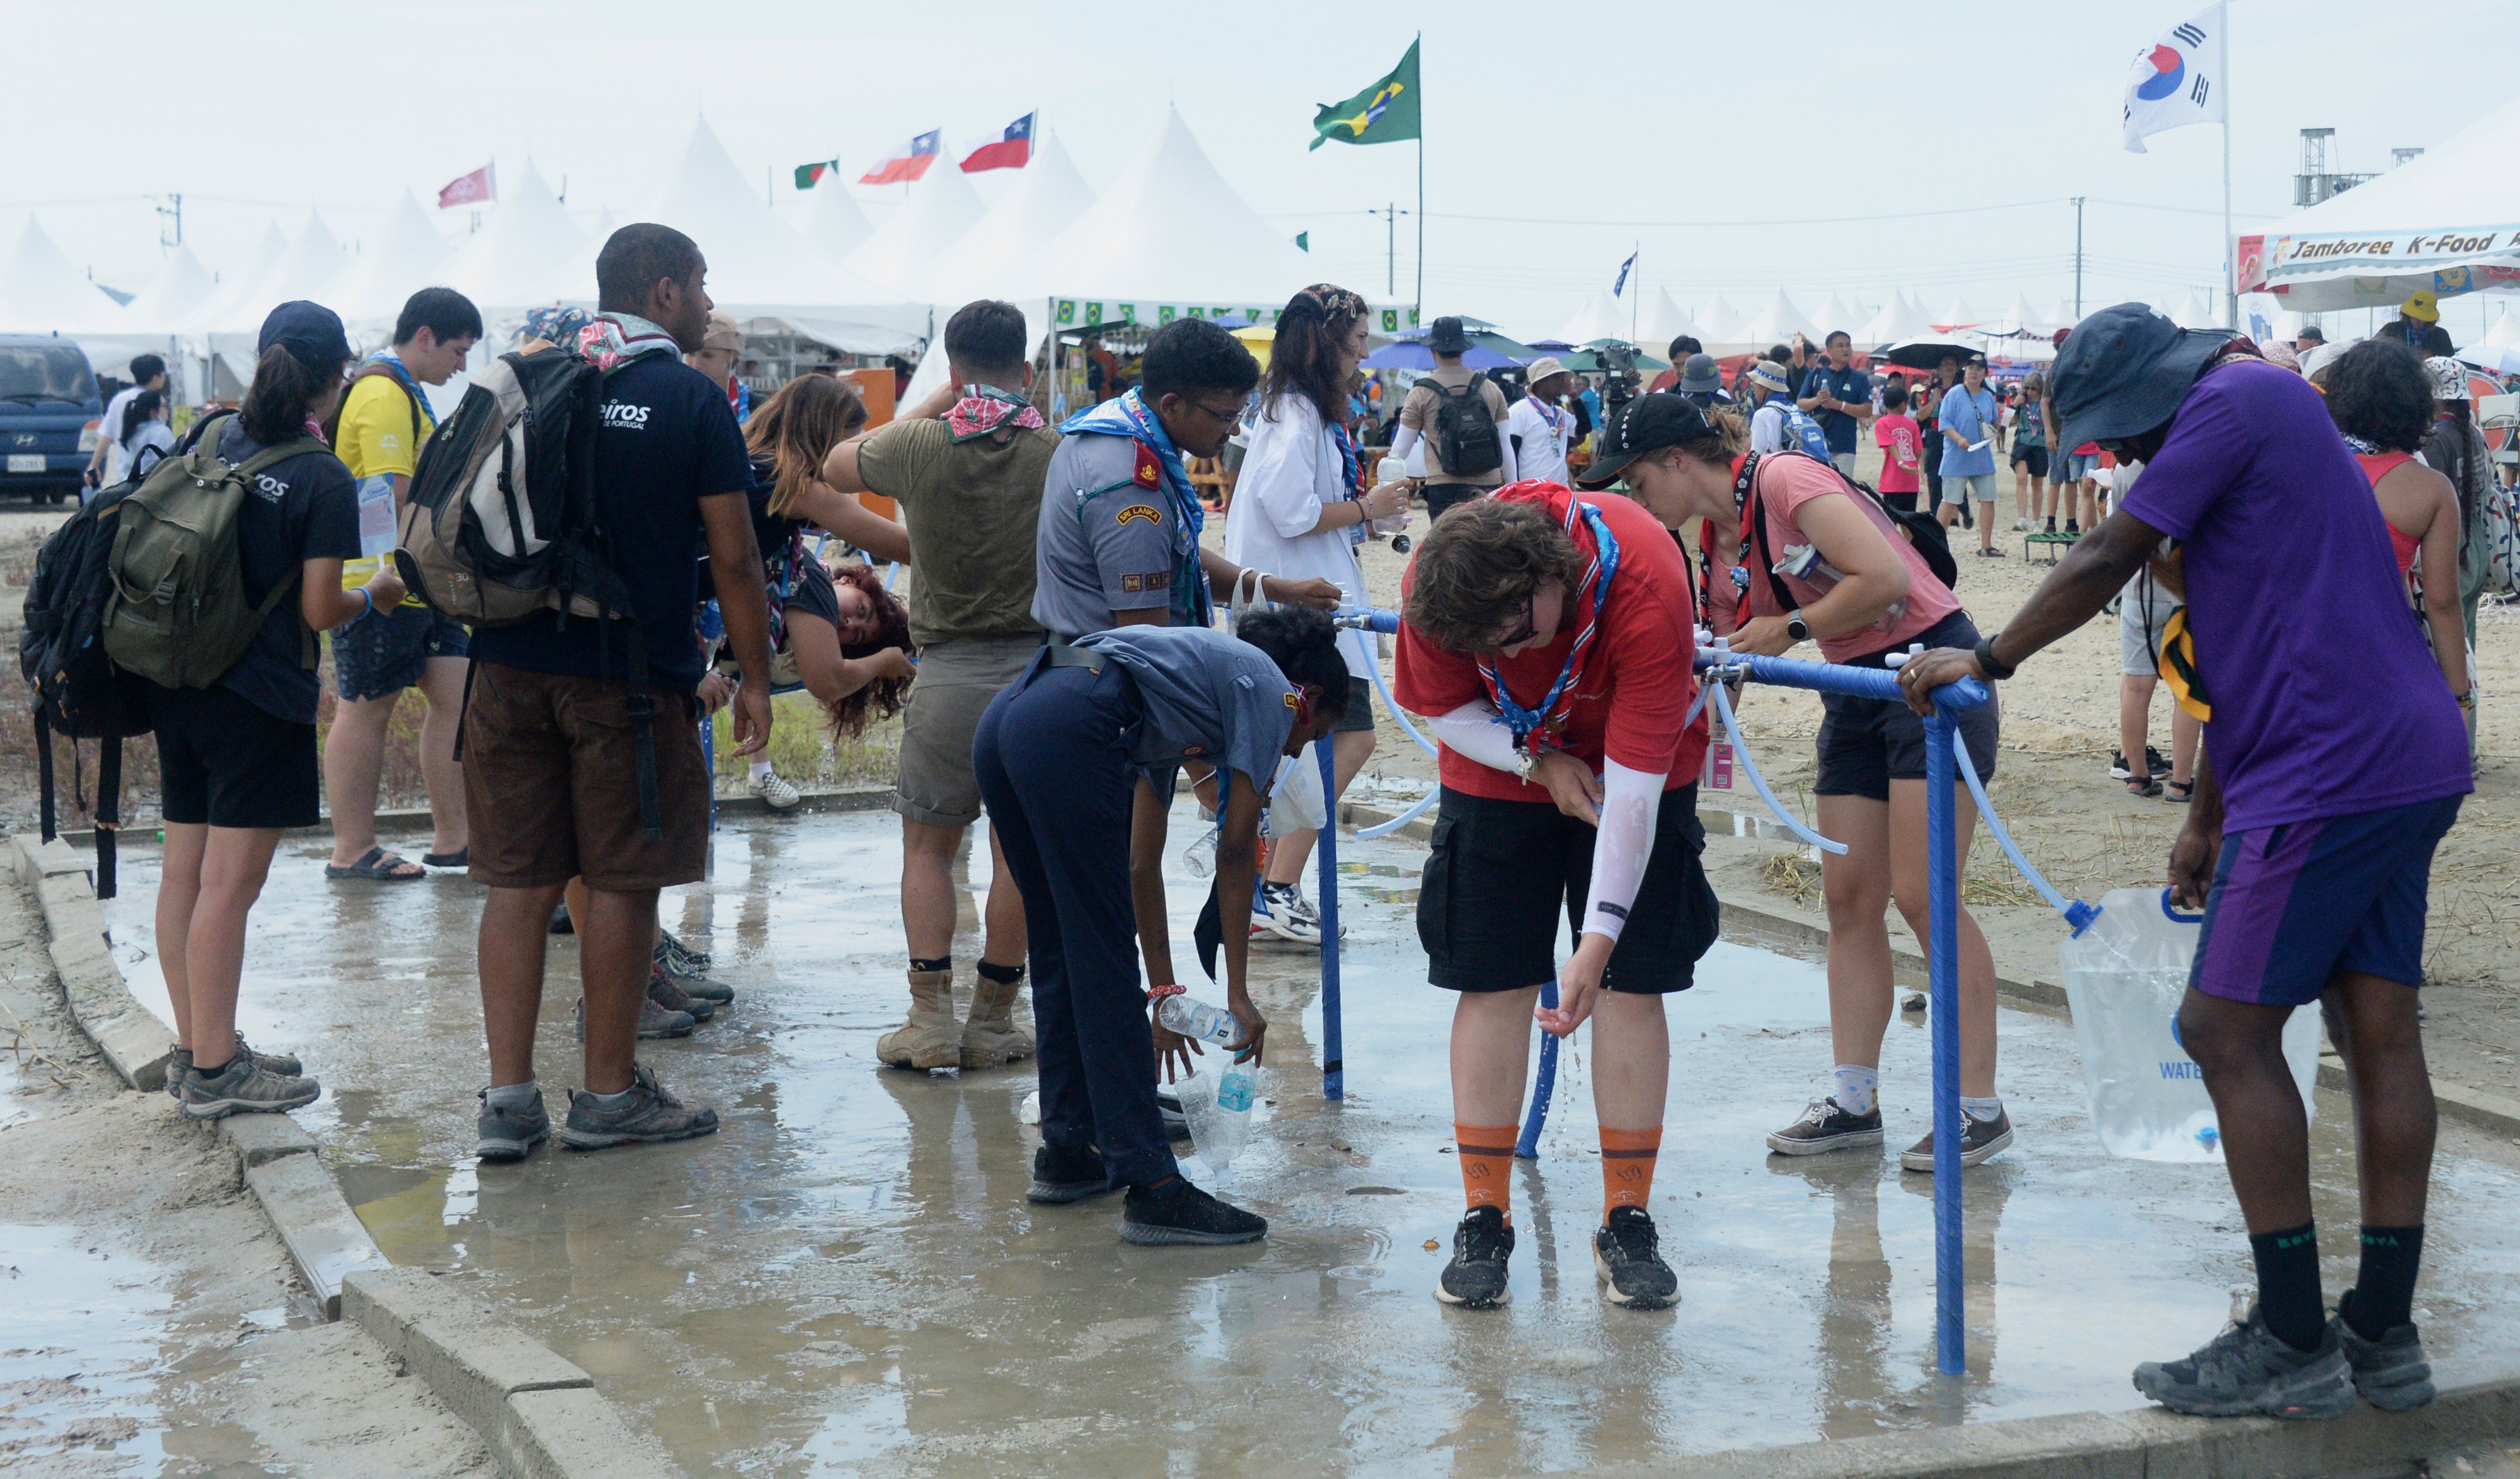 Attendees of the World Scout Jamboree cool off with water at a scout camping site in Buan, South Korea